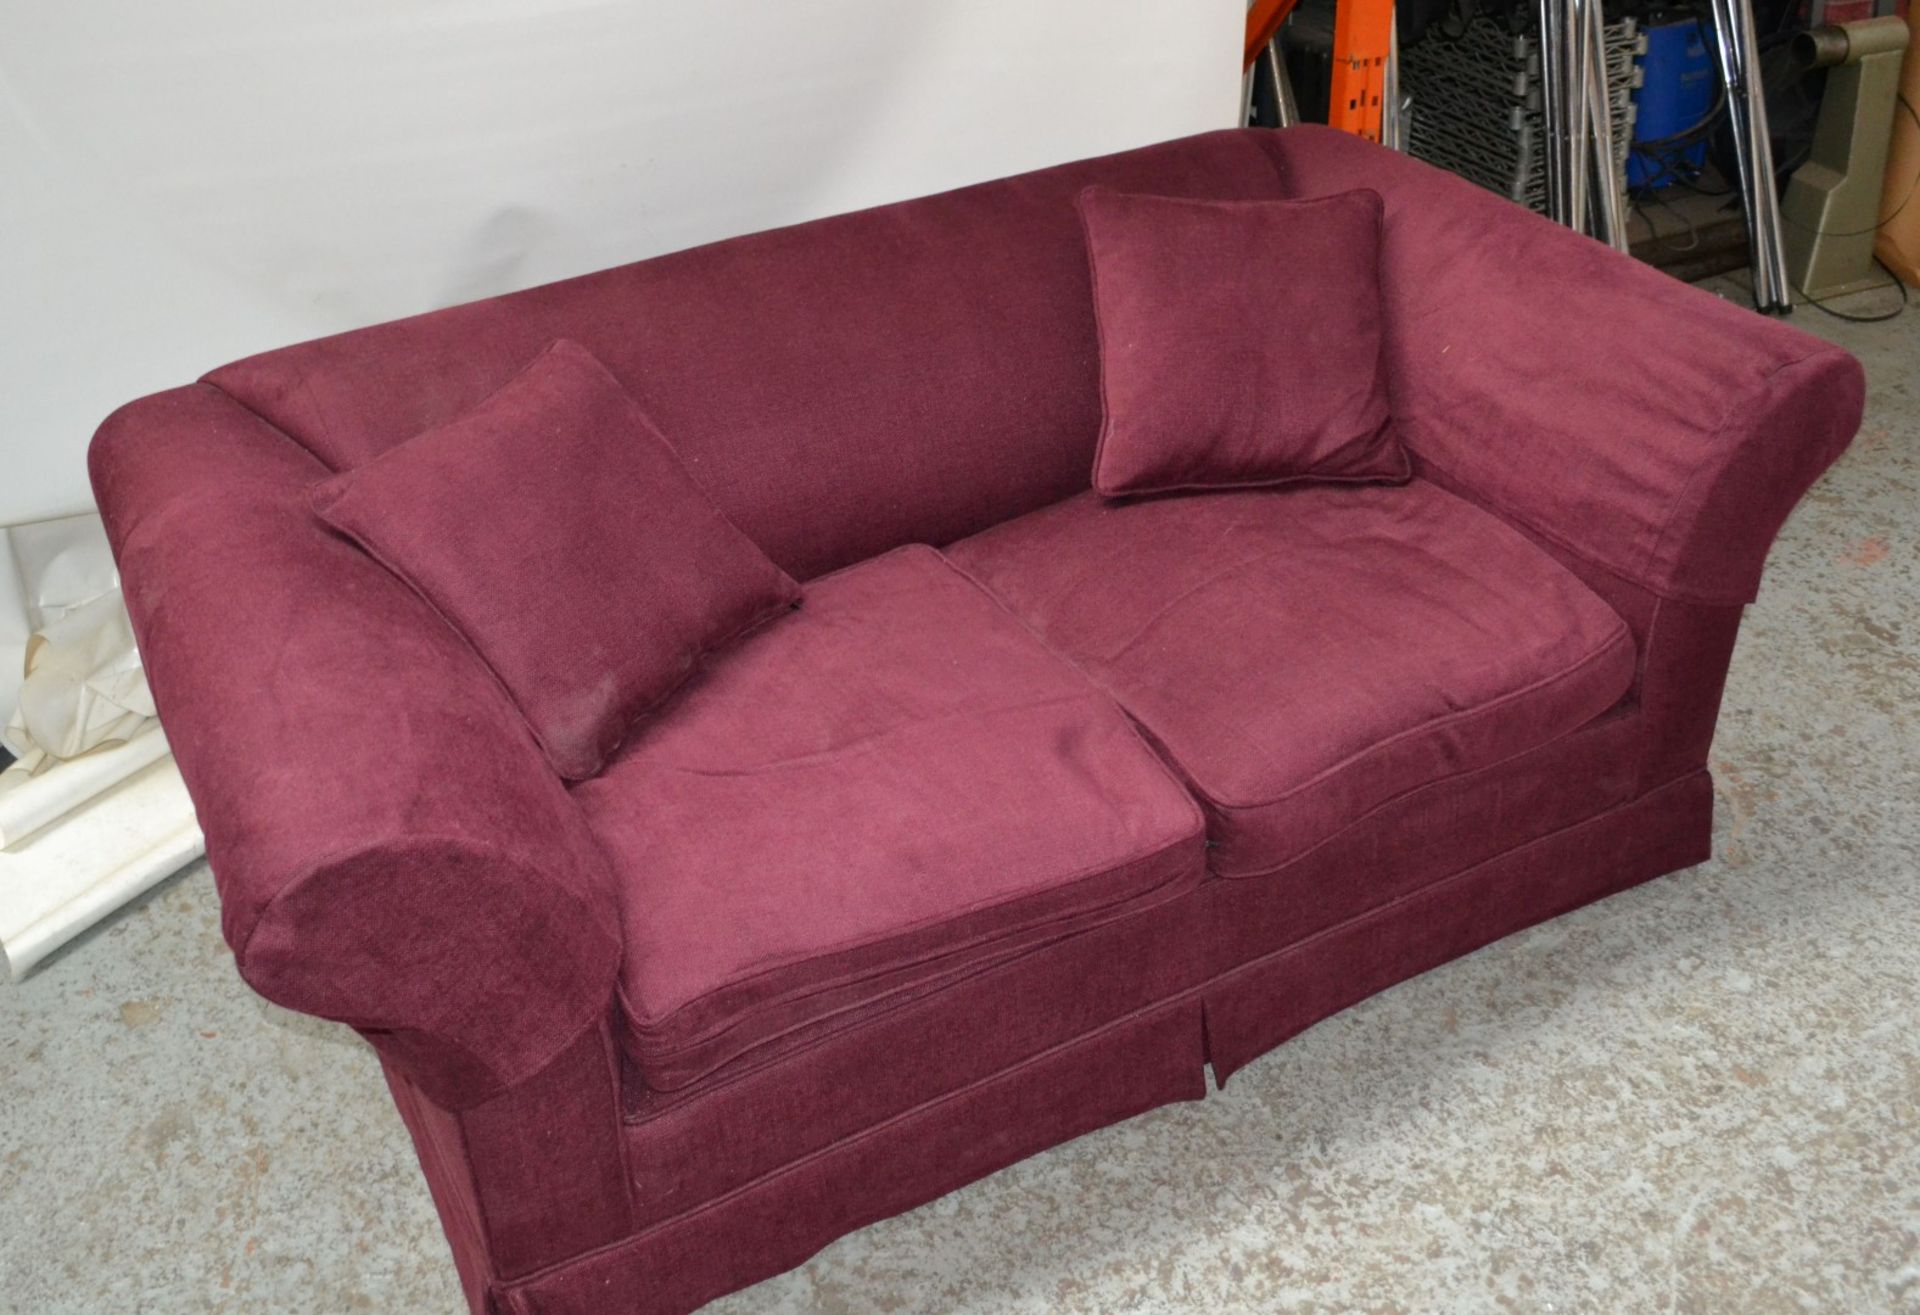 1 x Large Purple Sofa With Arm Covers - CL314 - Location: Altrincham WA14 - *NO VAT On Hammer*<B - Image 6 of 9